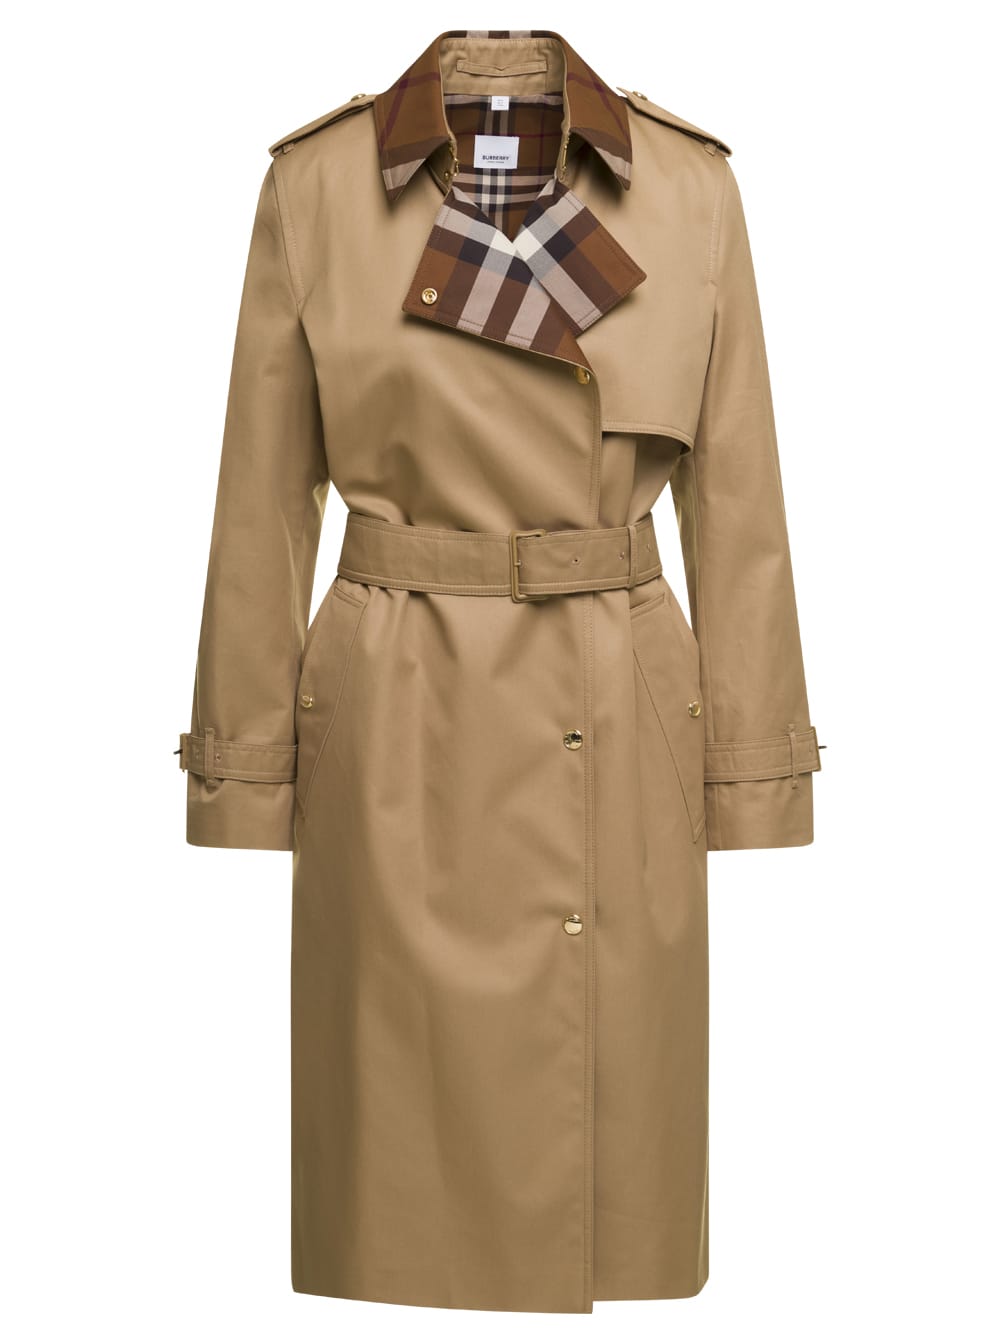 Camel Brown Trench Coat With Exaggerated Check Motif In Bespoke Cotton Gabardine Burberry